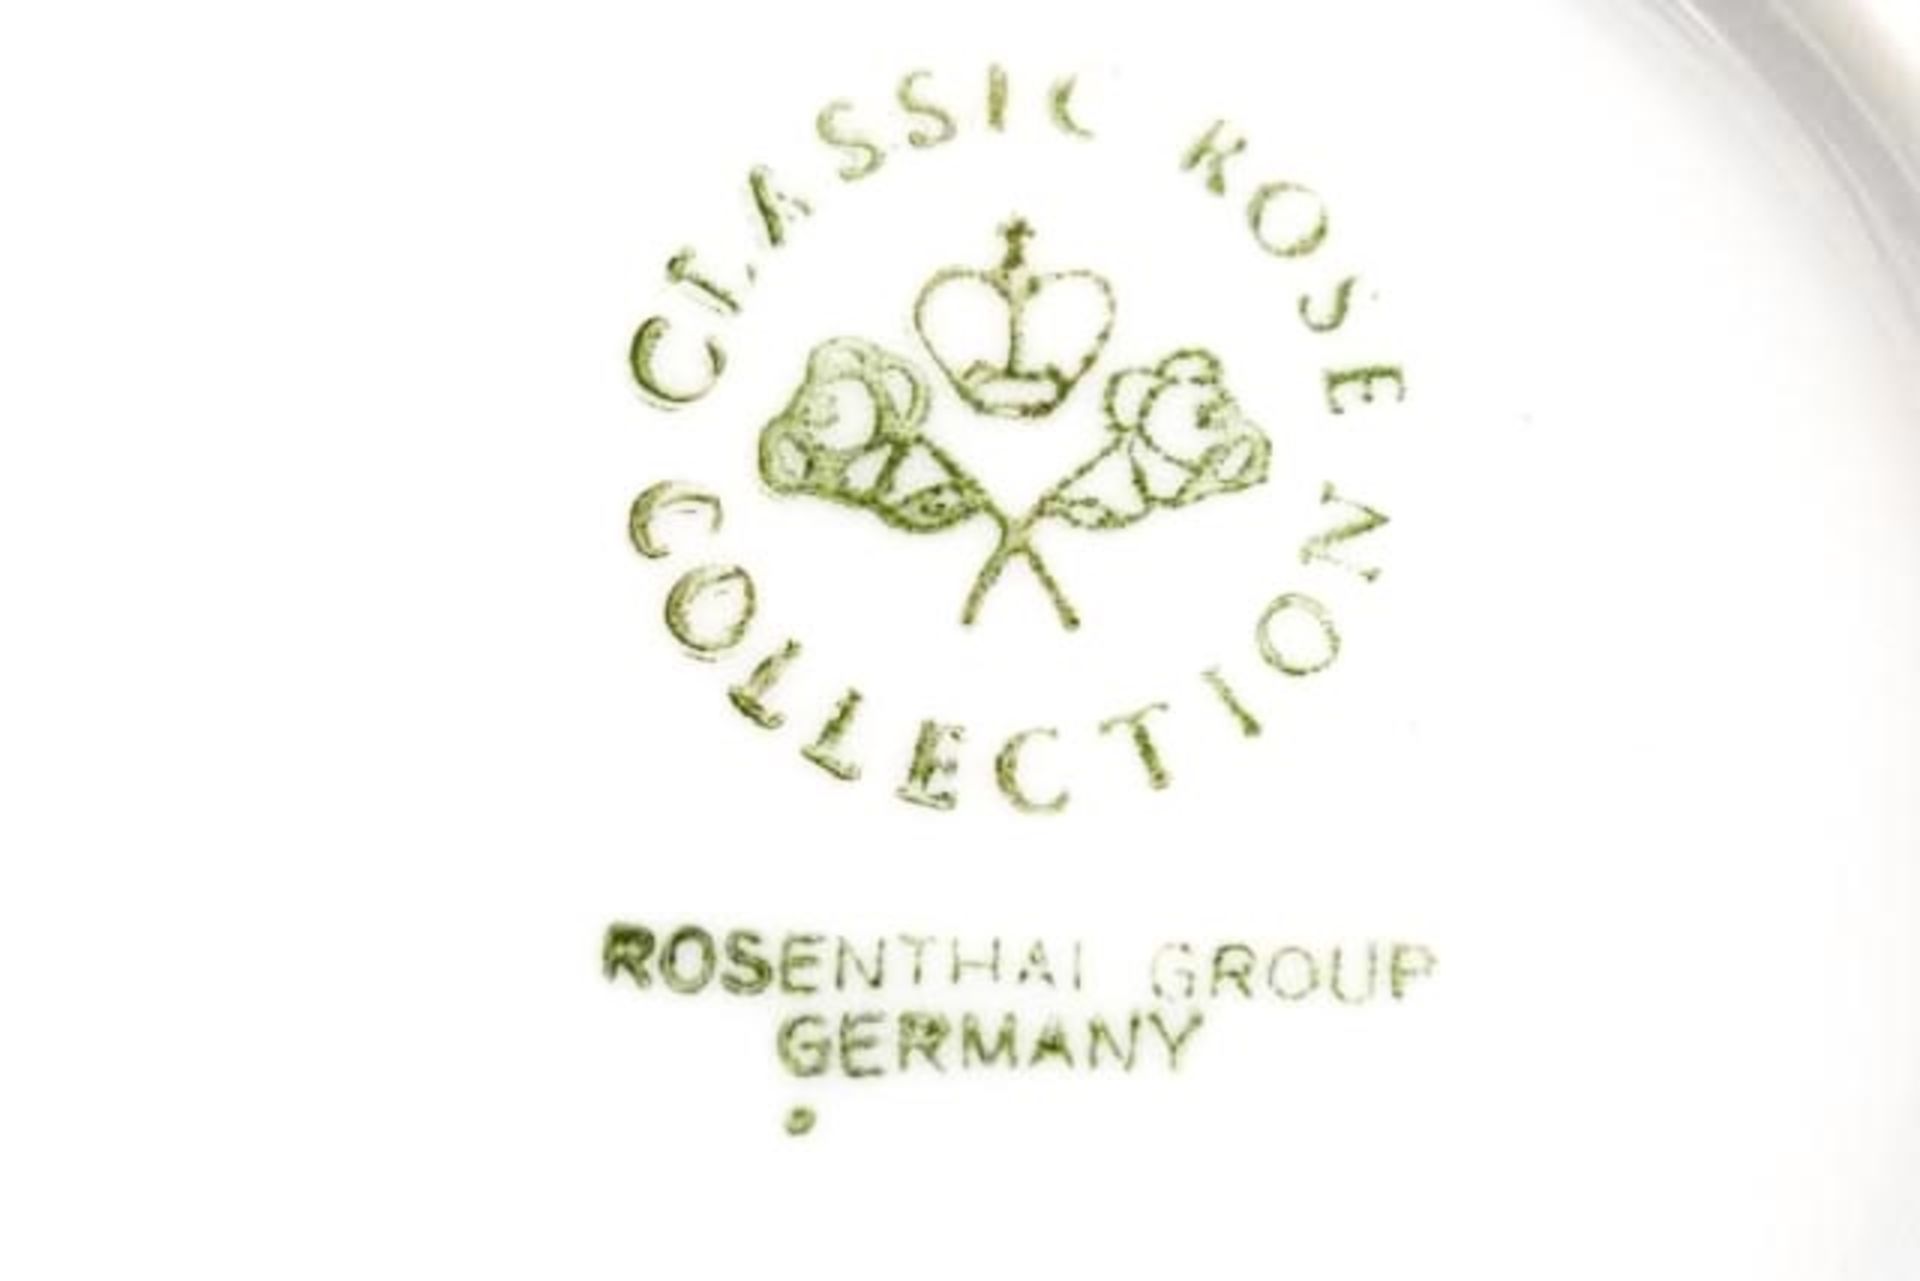 Rosenthal "Classic Rose" Restservice - Image 3 of 3